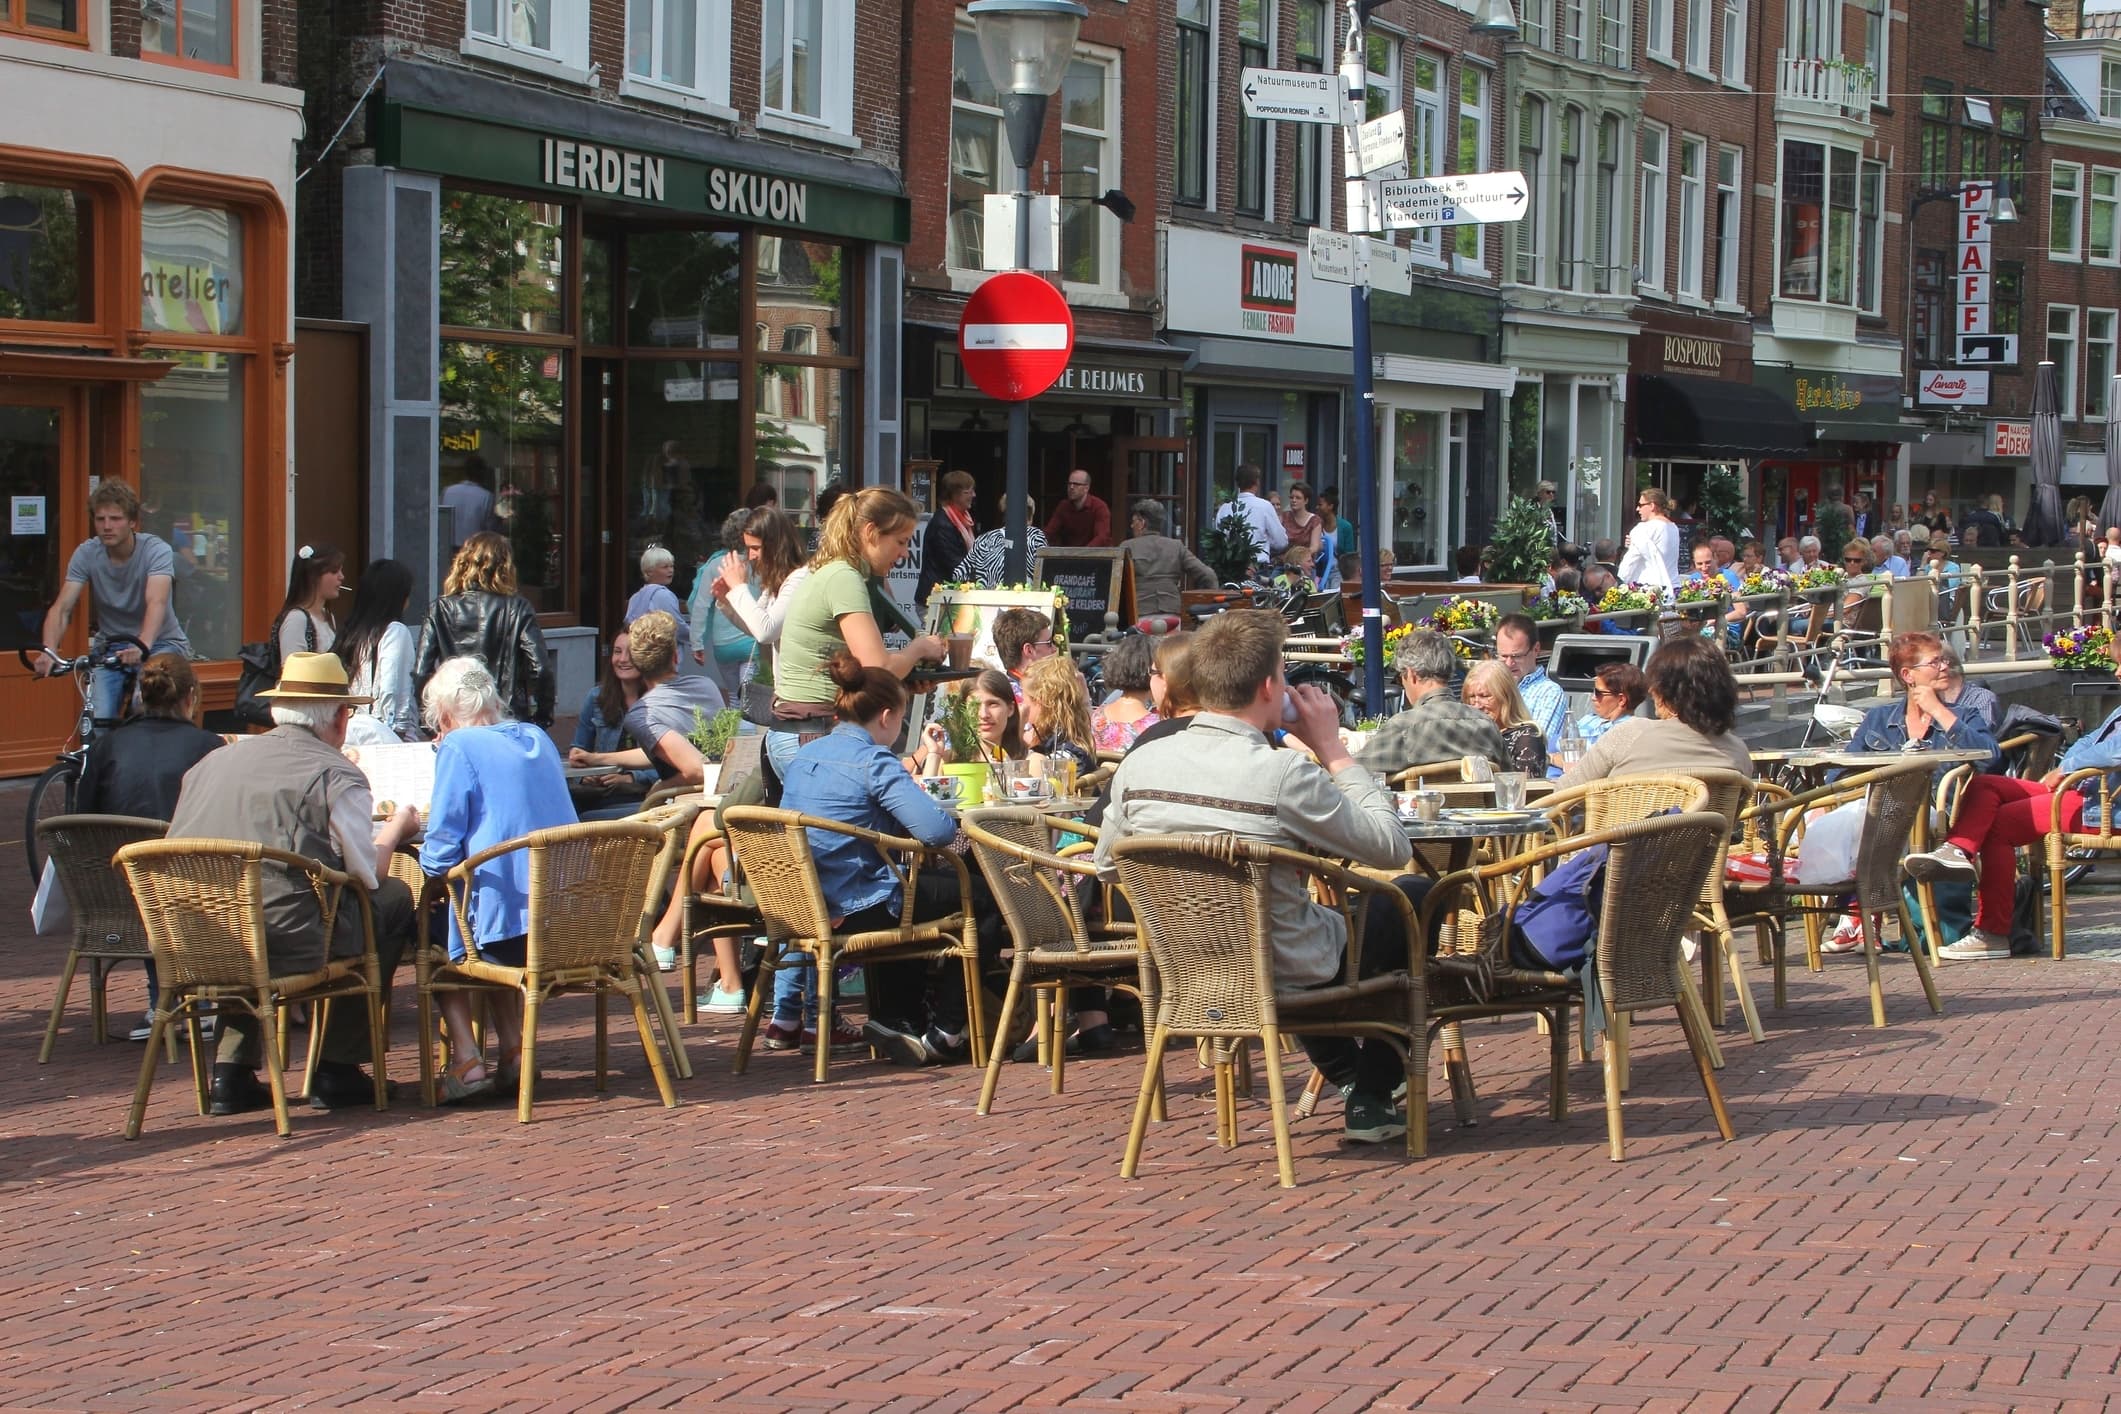 A street scene with people at cafe tables in Friesland, Netherlands